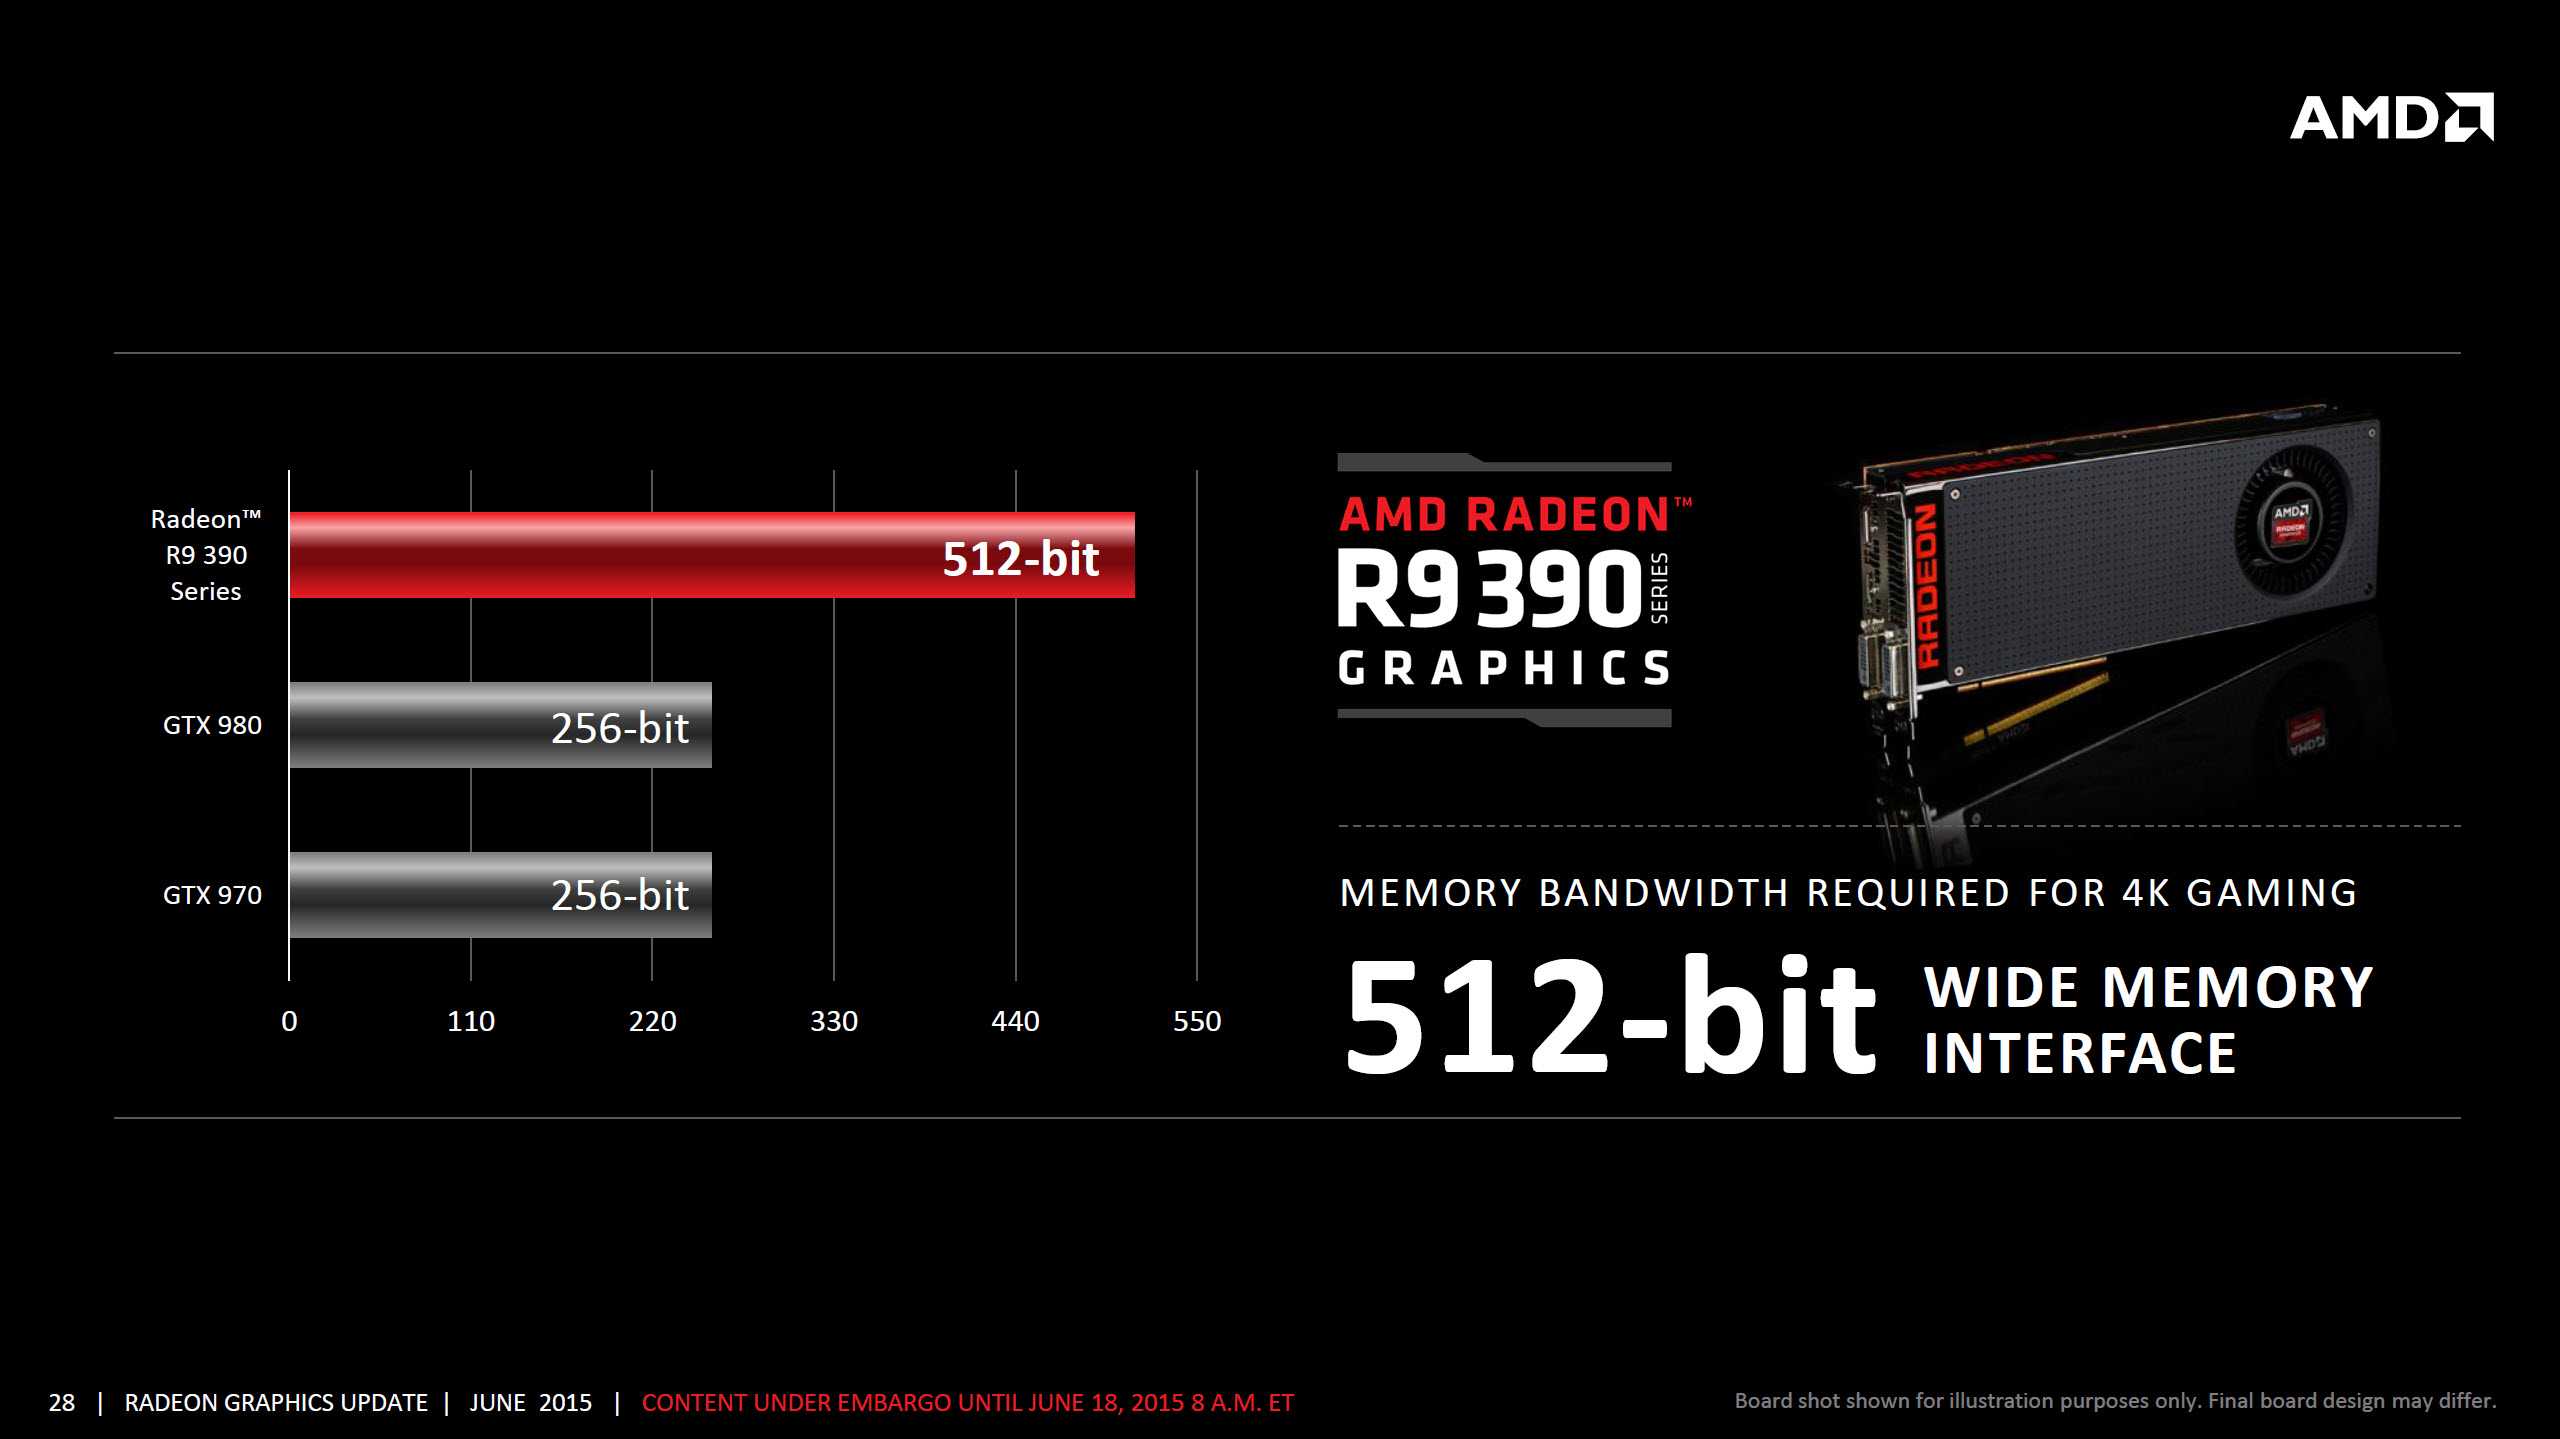 Amd radeon 300 series officially launches - r9 390x, r9 390, r9 380, r7 370 and r7 360 performance, specifications detailed